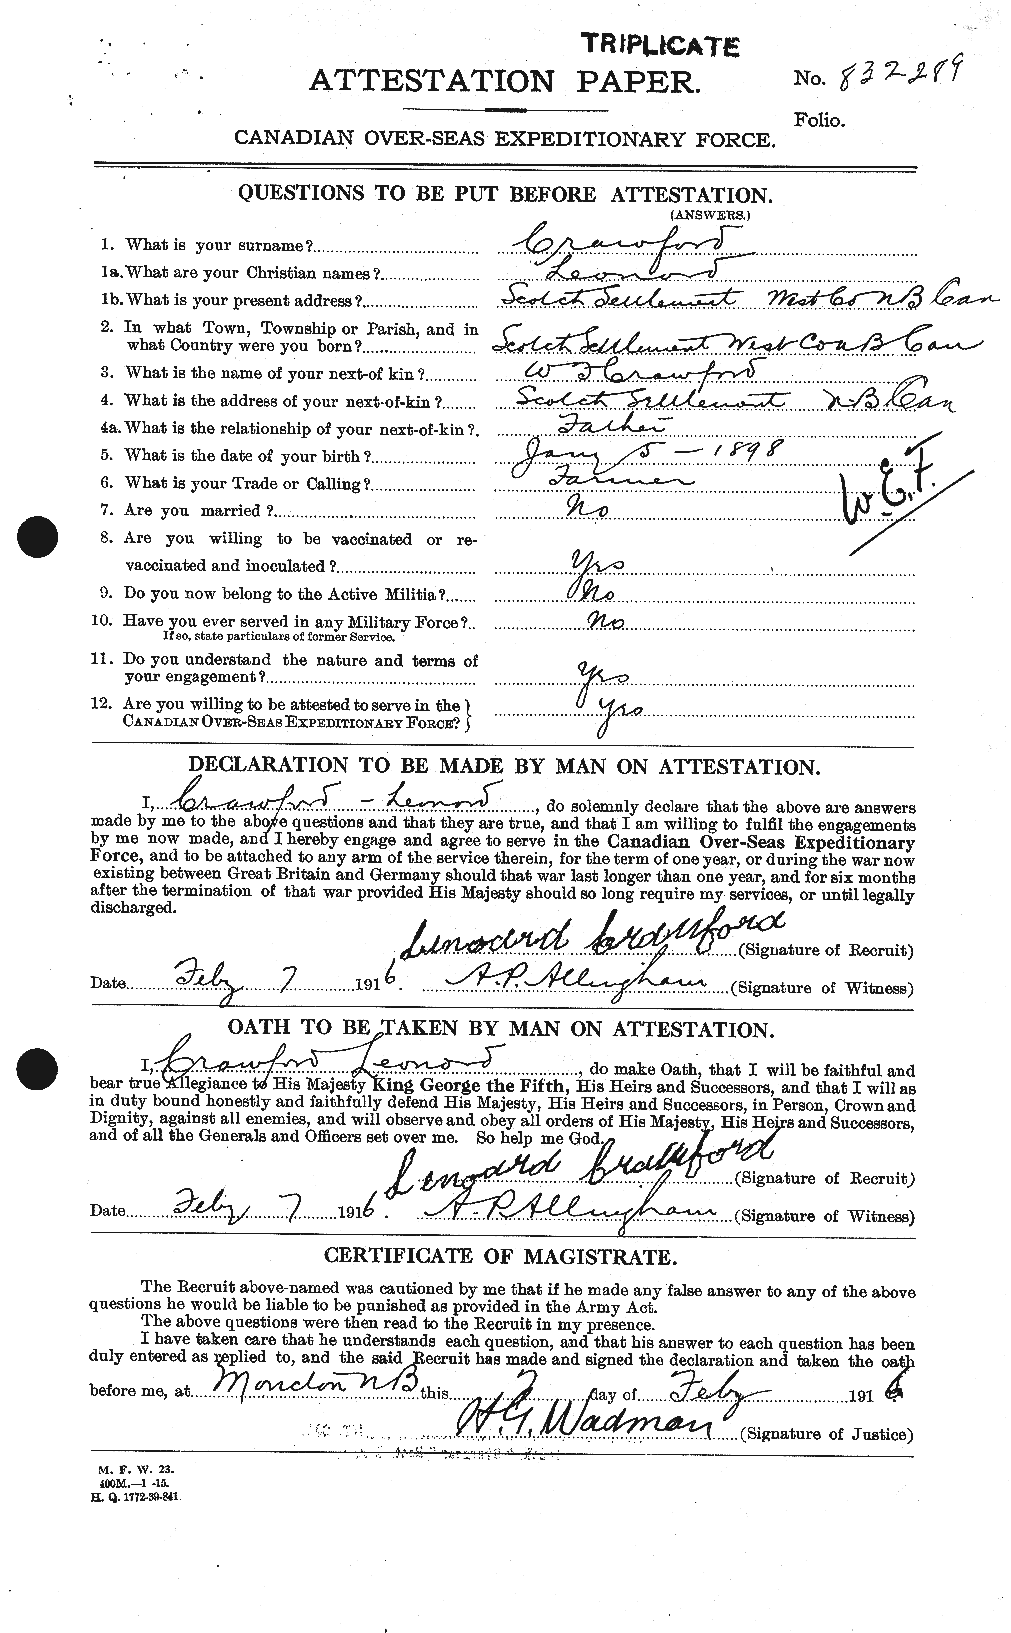 Personnel Records of the First World War - CEF 061797a